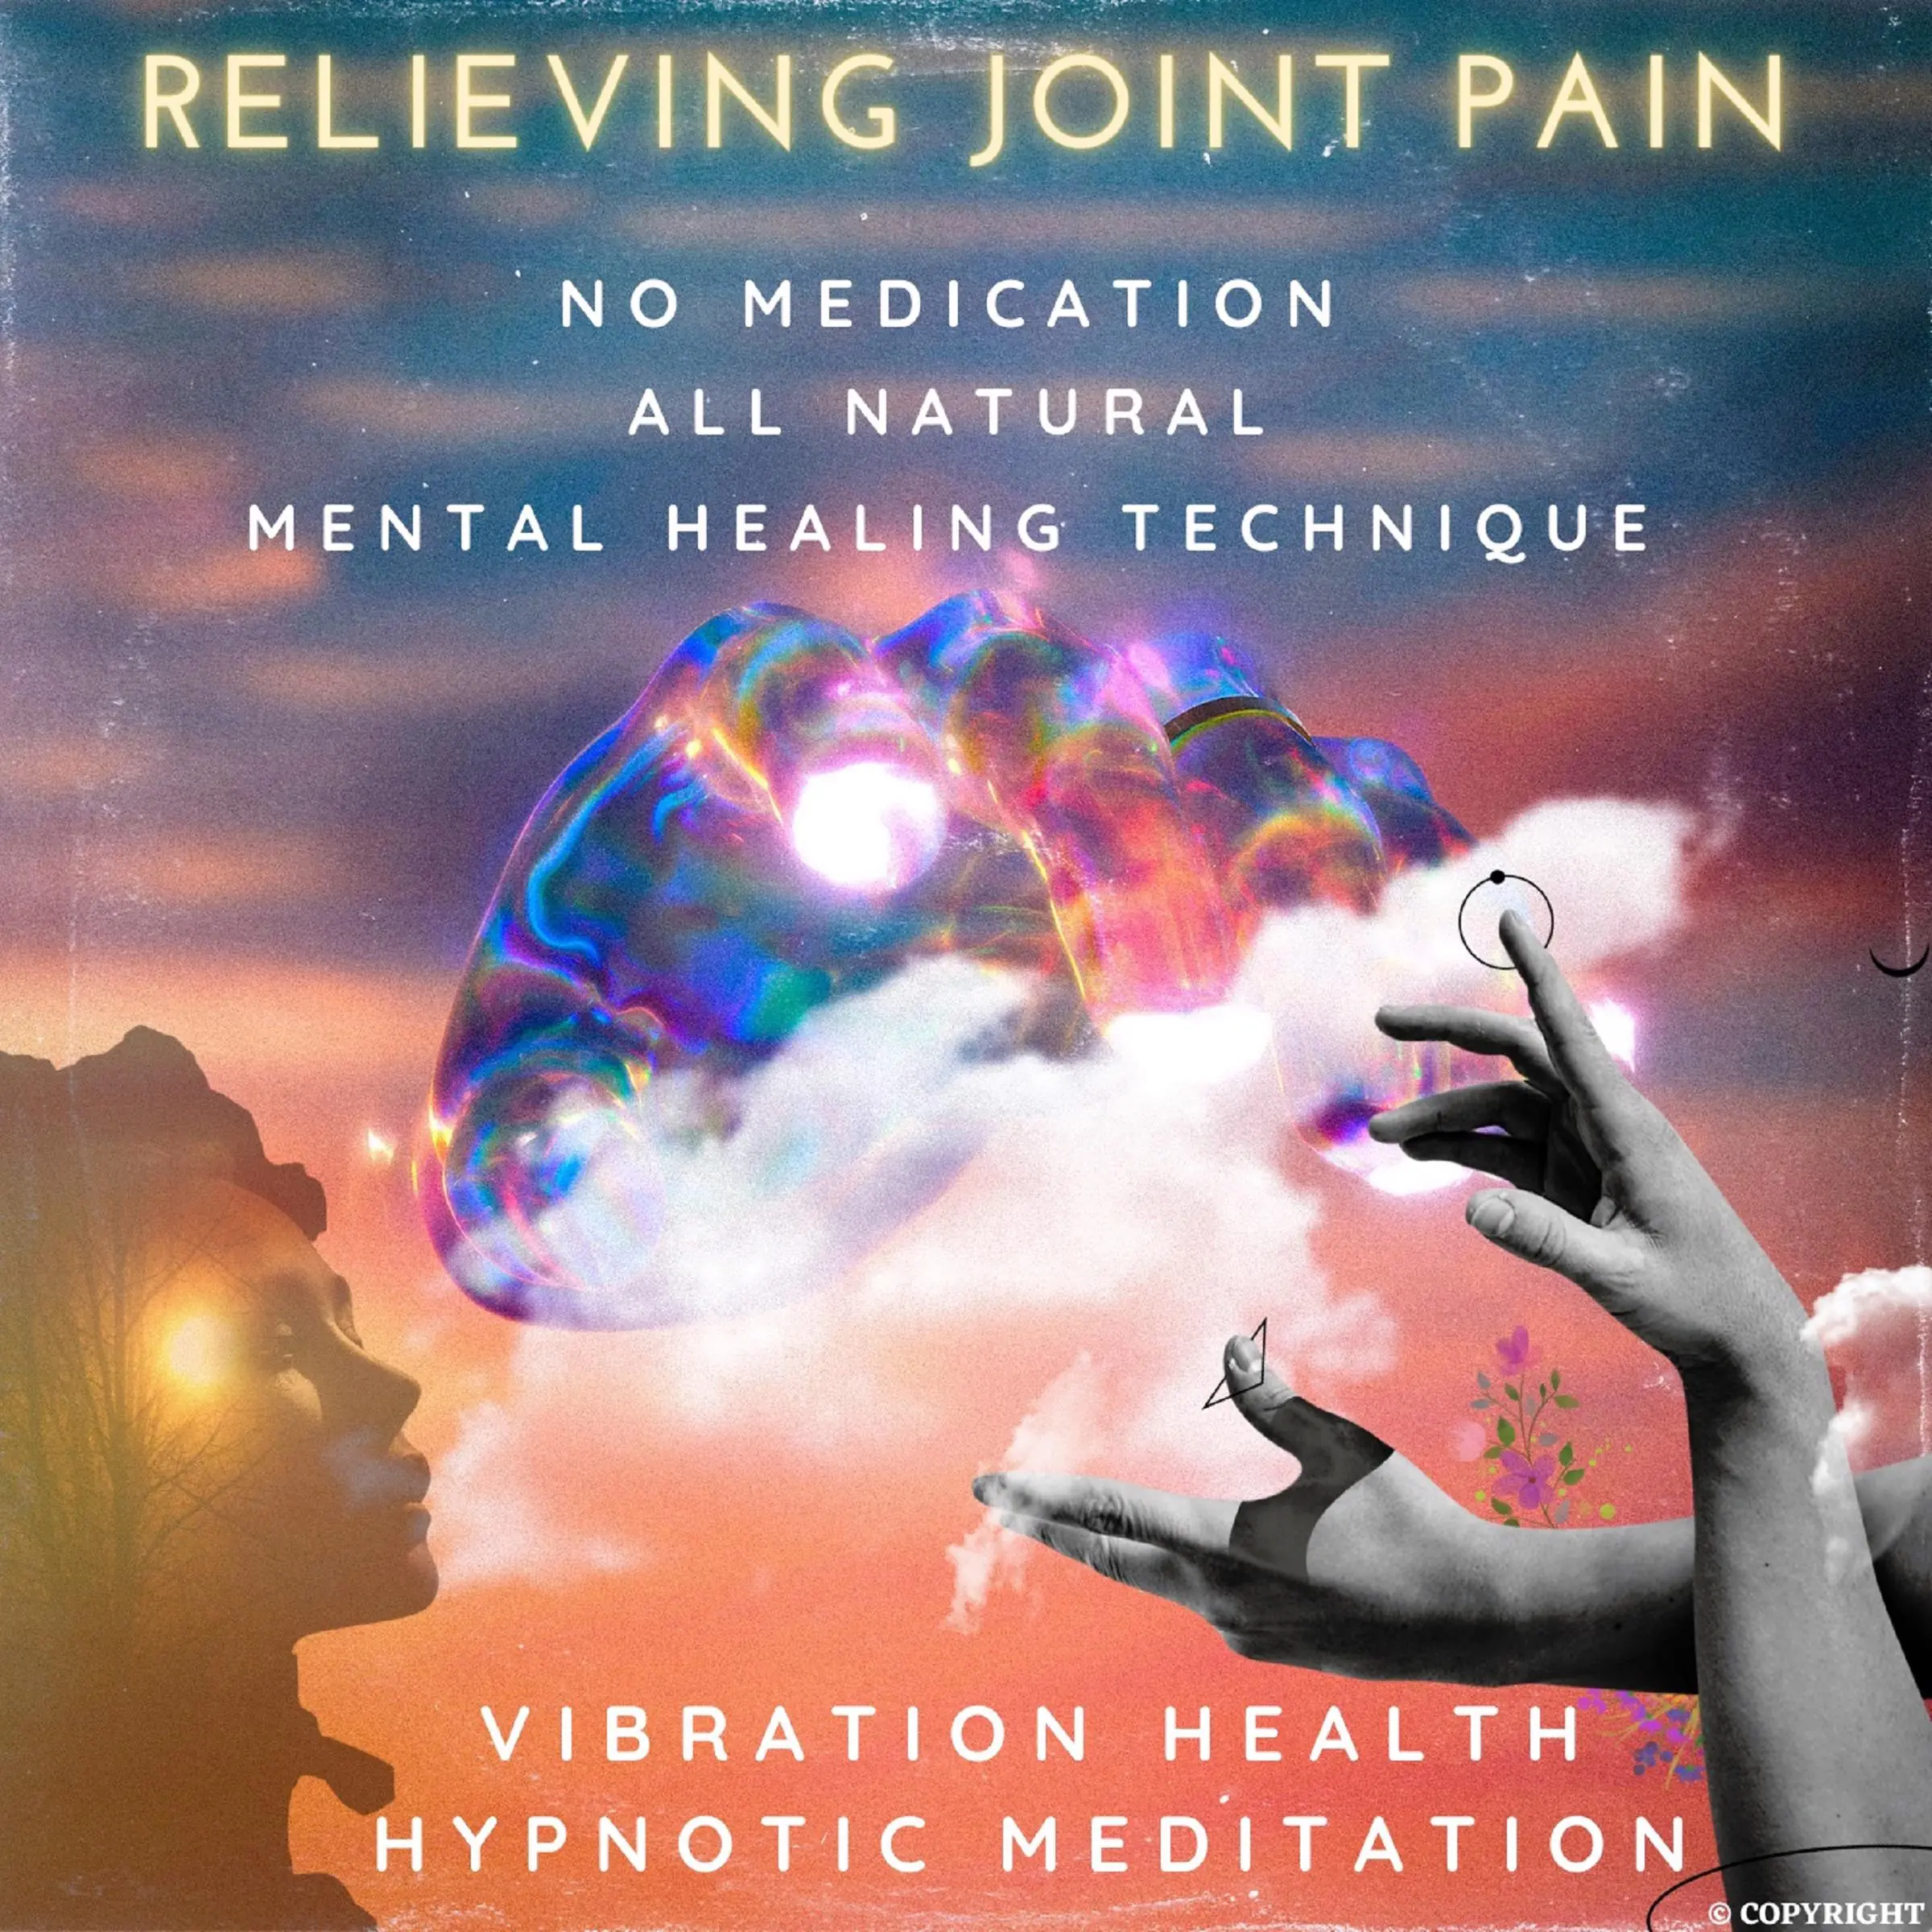 Relieving Joint Pain Audiobook by Vibration Health Hypnotic Meditation